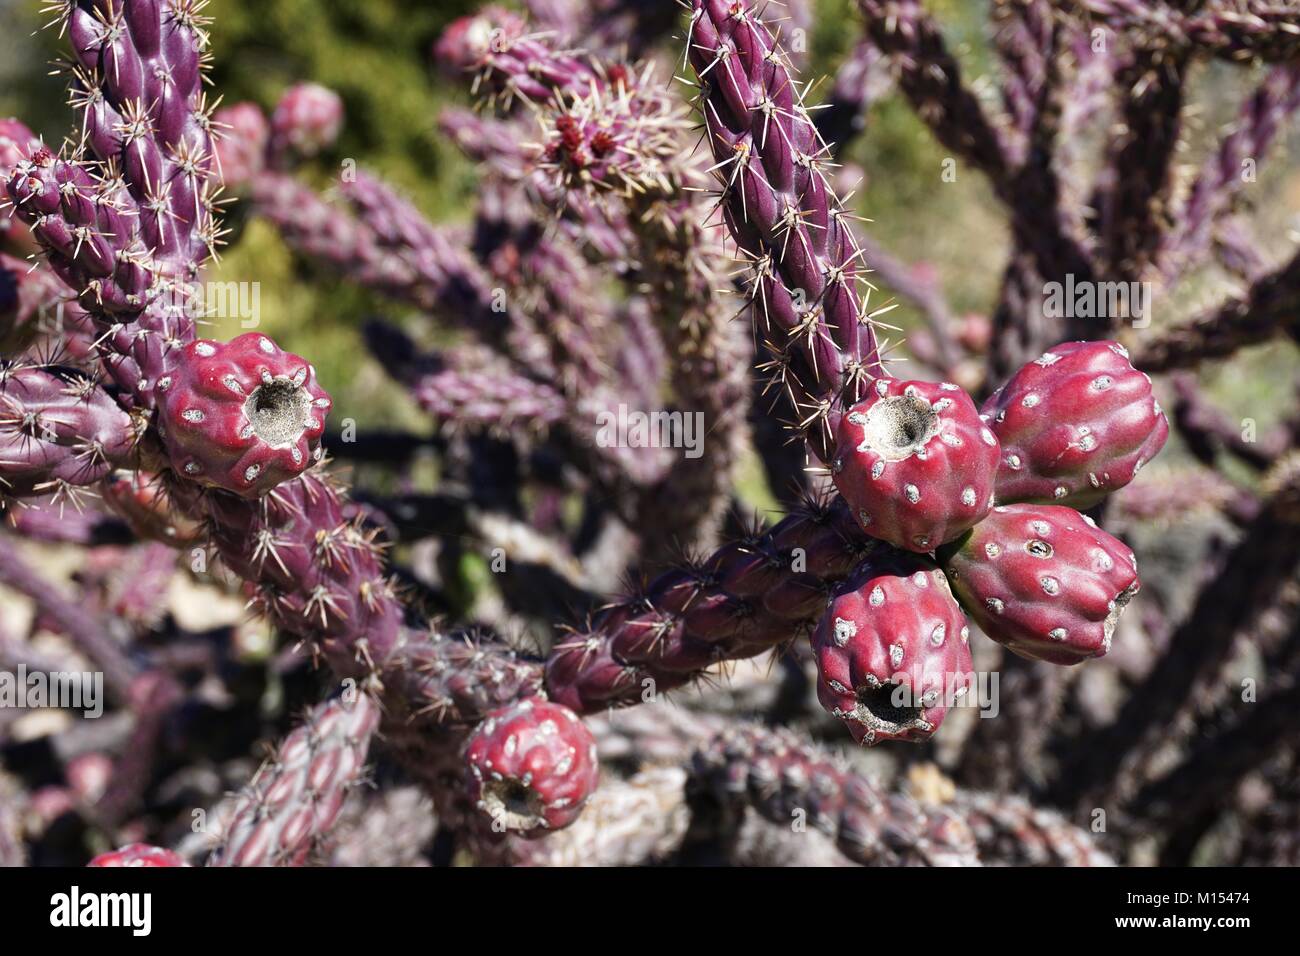 Colorful desert cactus plant with red fruit in the American Southwest Stock Photo